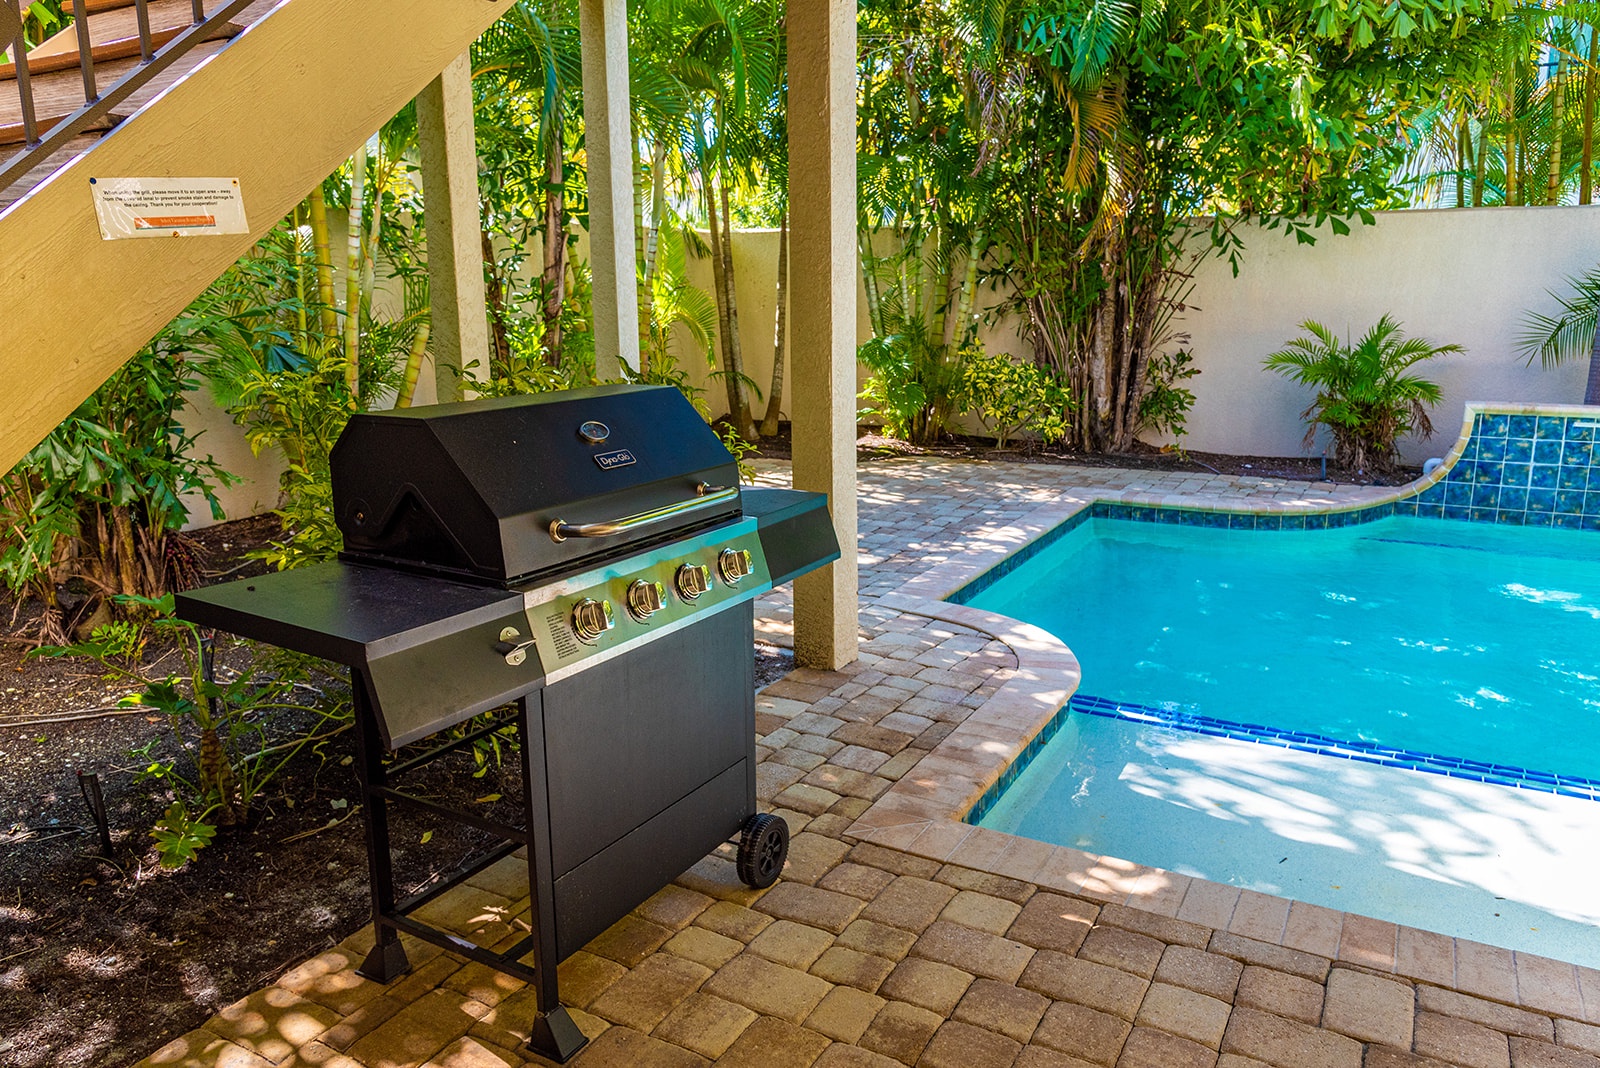 Gas BBQ Grill for outdoor dining